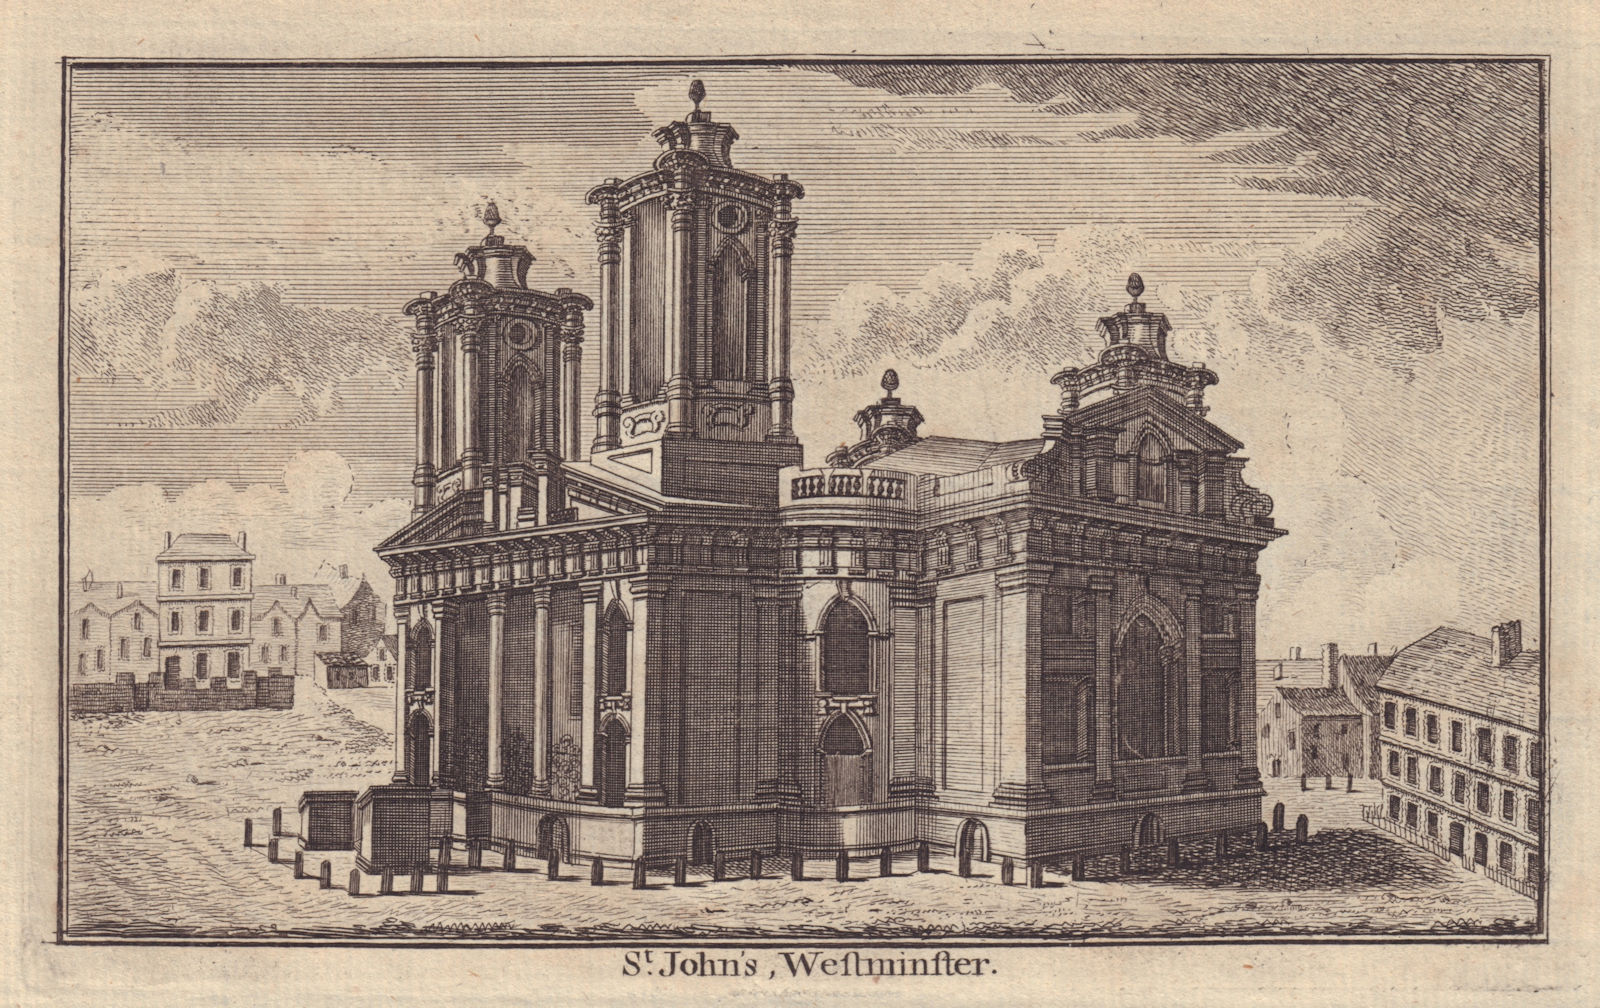 The Church of St. John's, Westminster. London. GENTS MAG 1747 old print